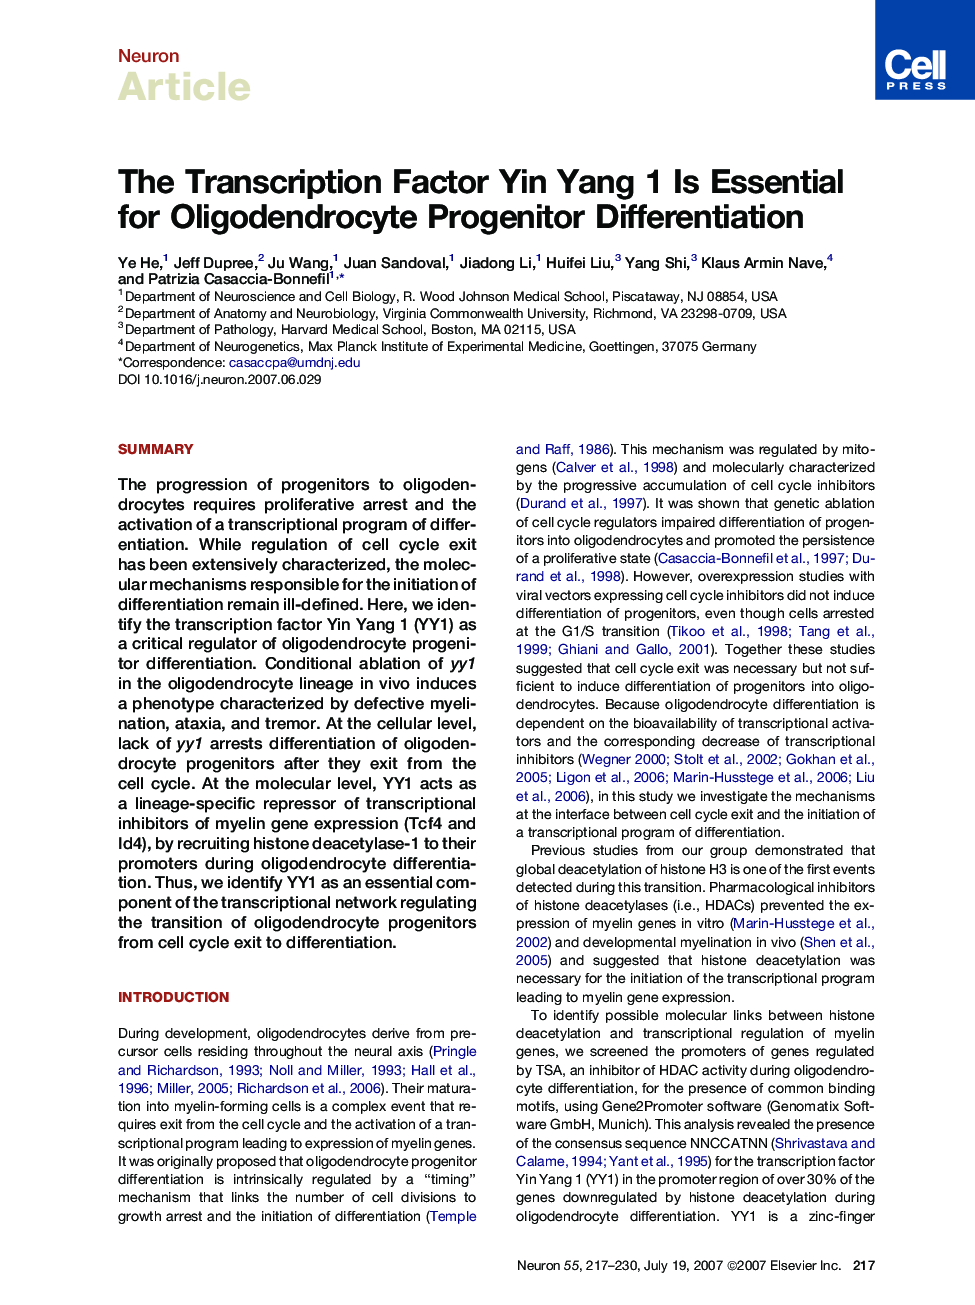 The Transcription Factor Yin Yang 1 Is Essential for Oligodendrocyte Progenitor Differentiation